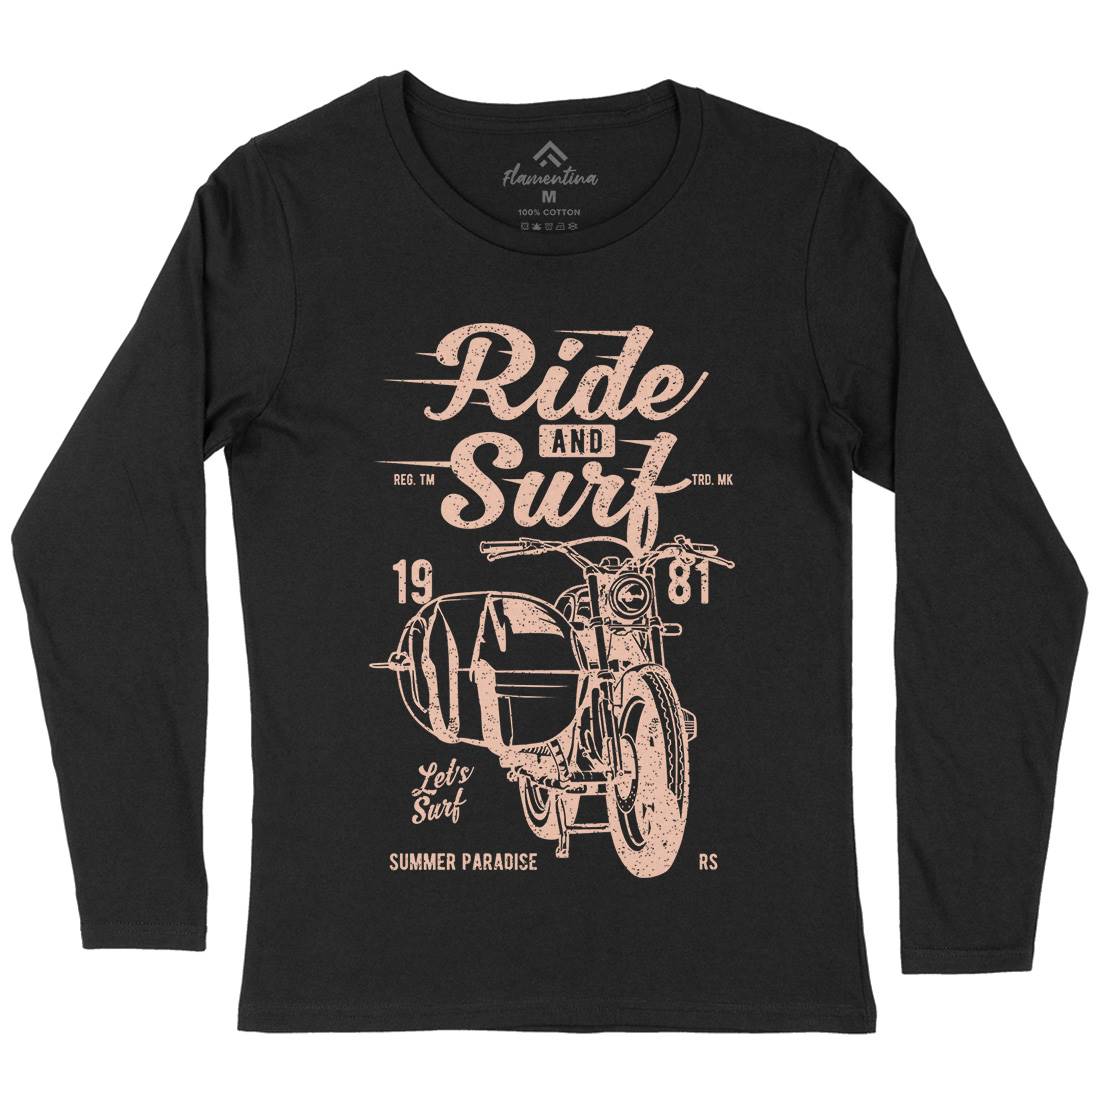 Ride And Womens Long Sleeve T-Shirt Surf A742